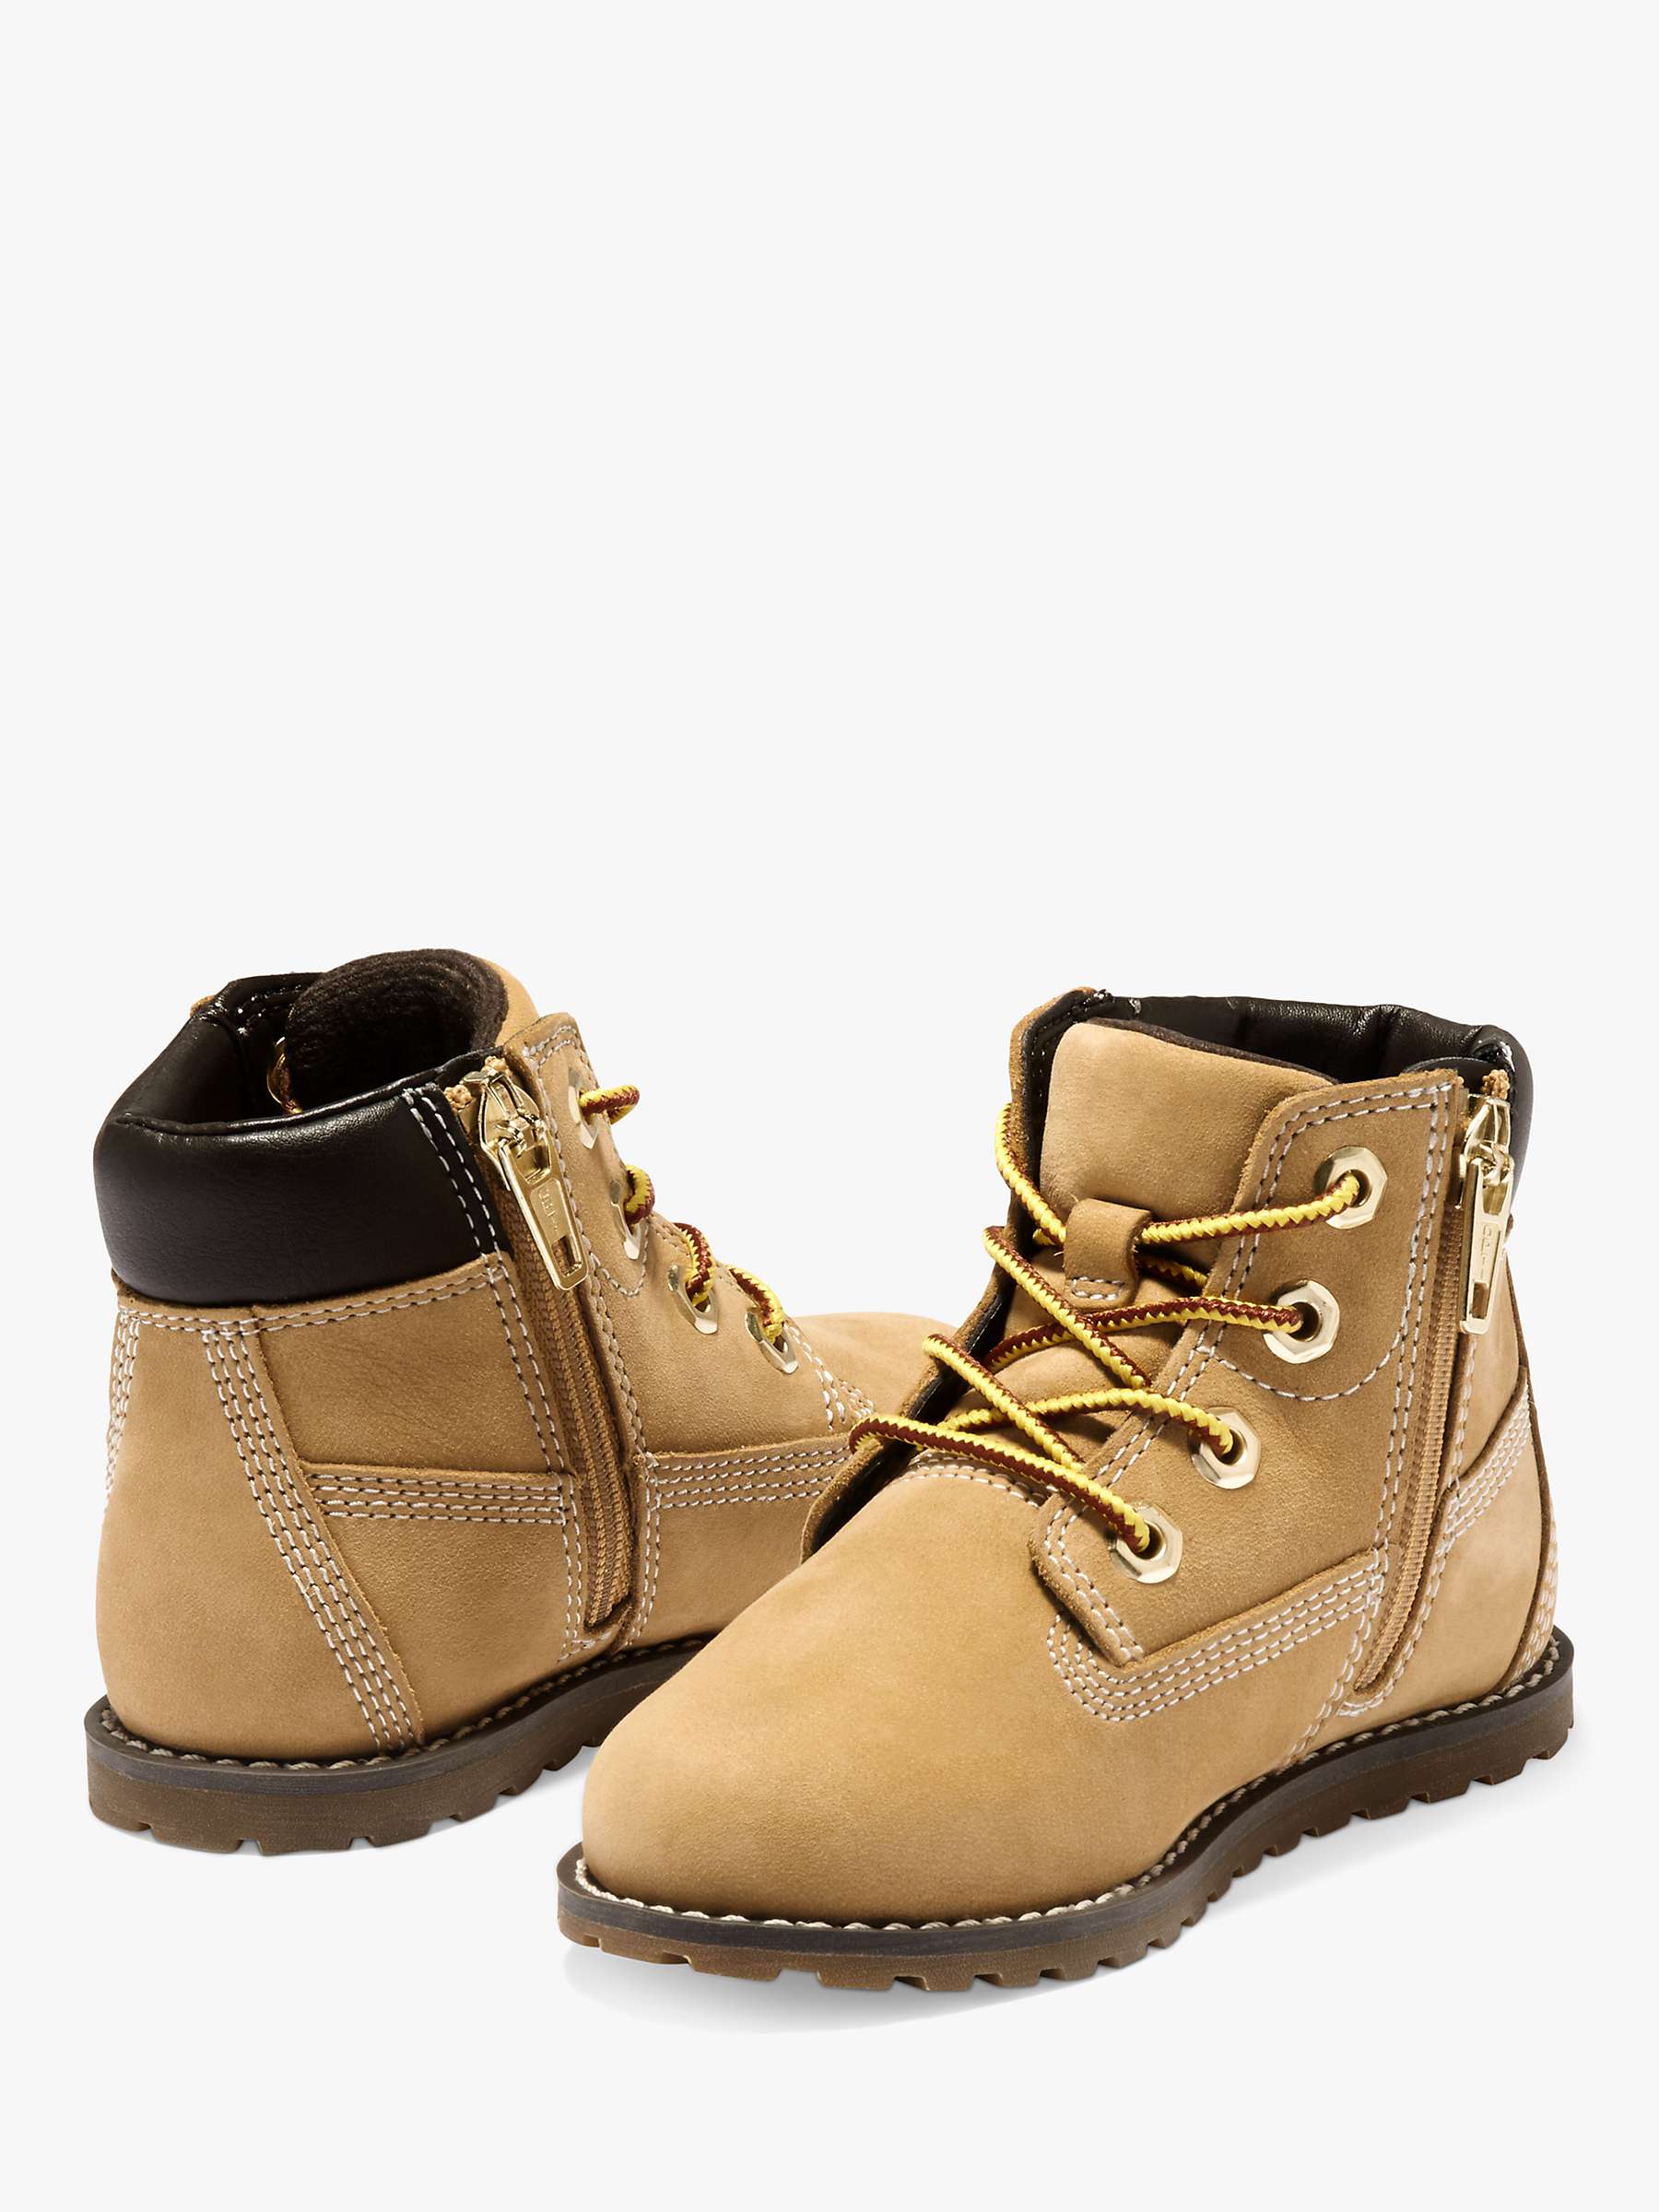 Buy Timberland Kids' Pokey Pine 6 Inch Boots Online at johnlewis.com